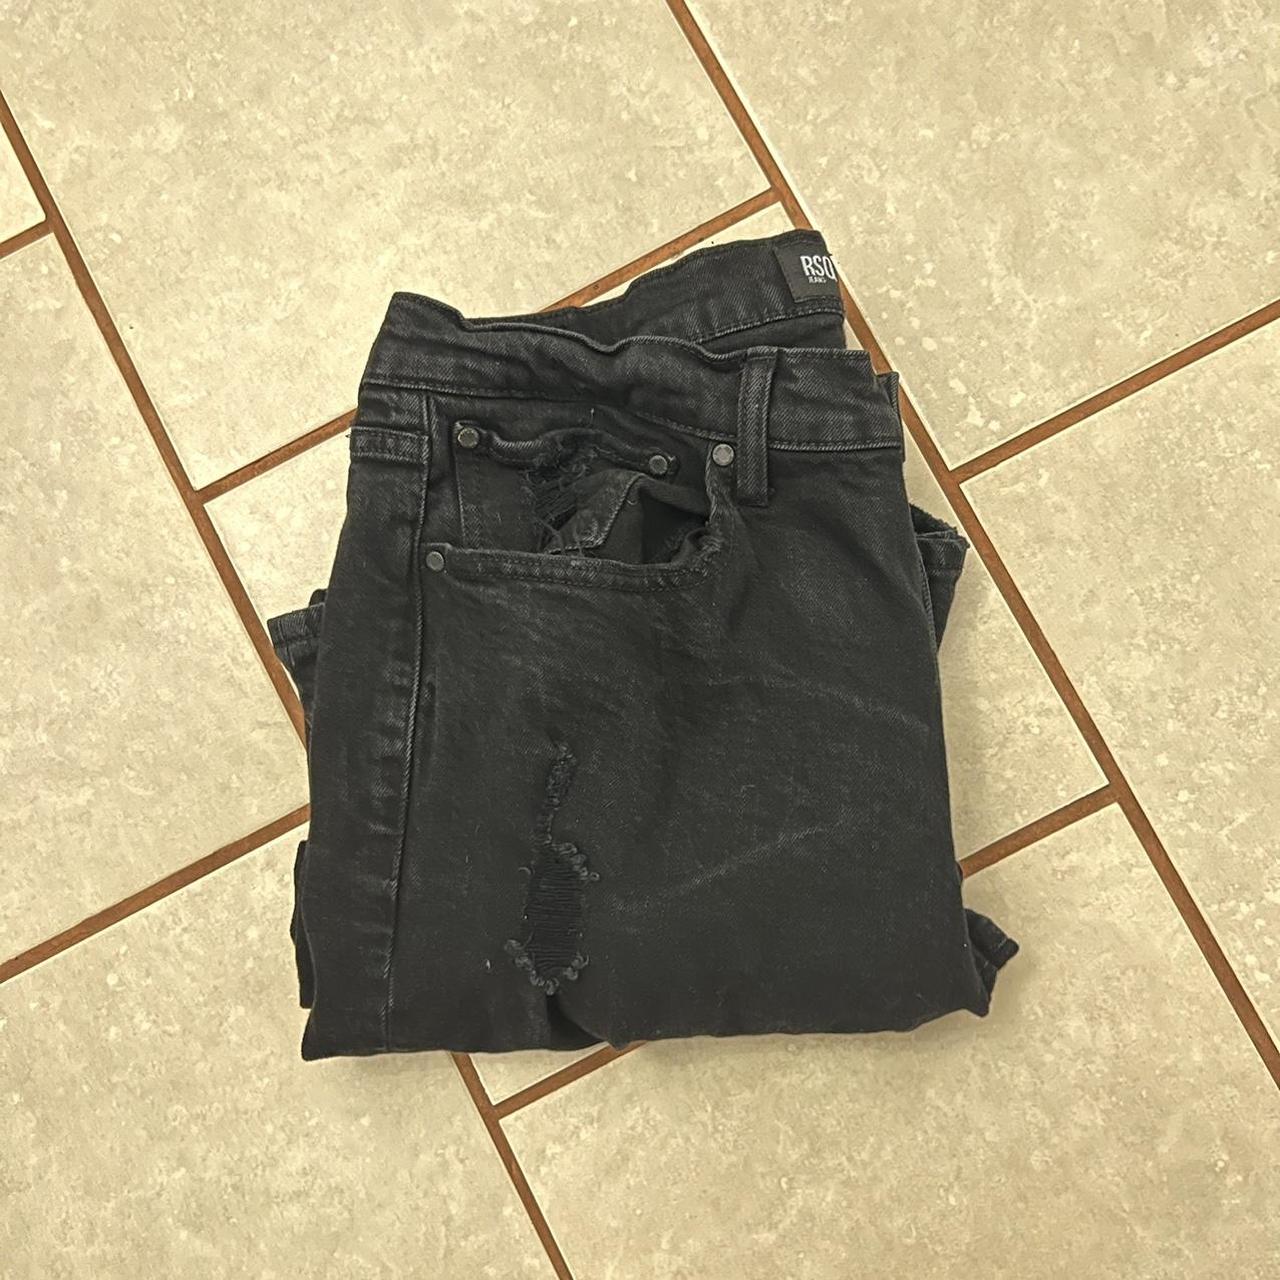 Product Image 4 - RSQ Skinny Distressed Jeans

Size 36x32

#distressed